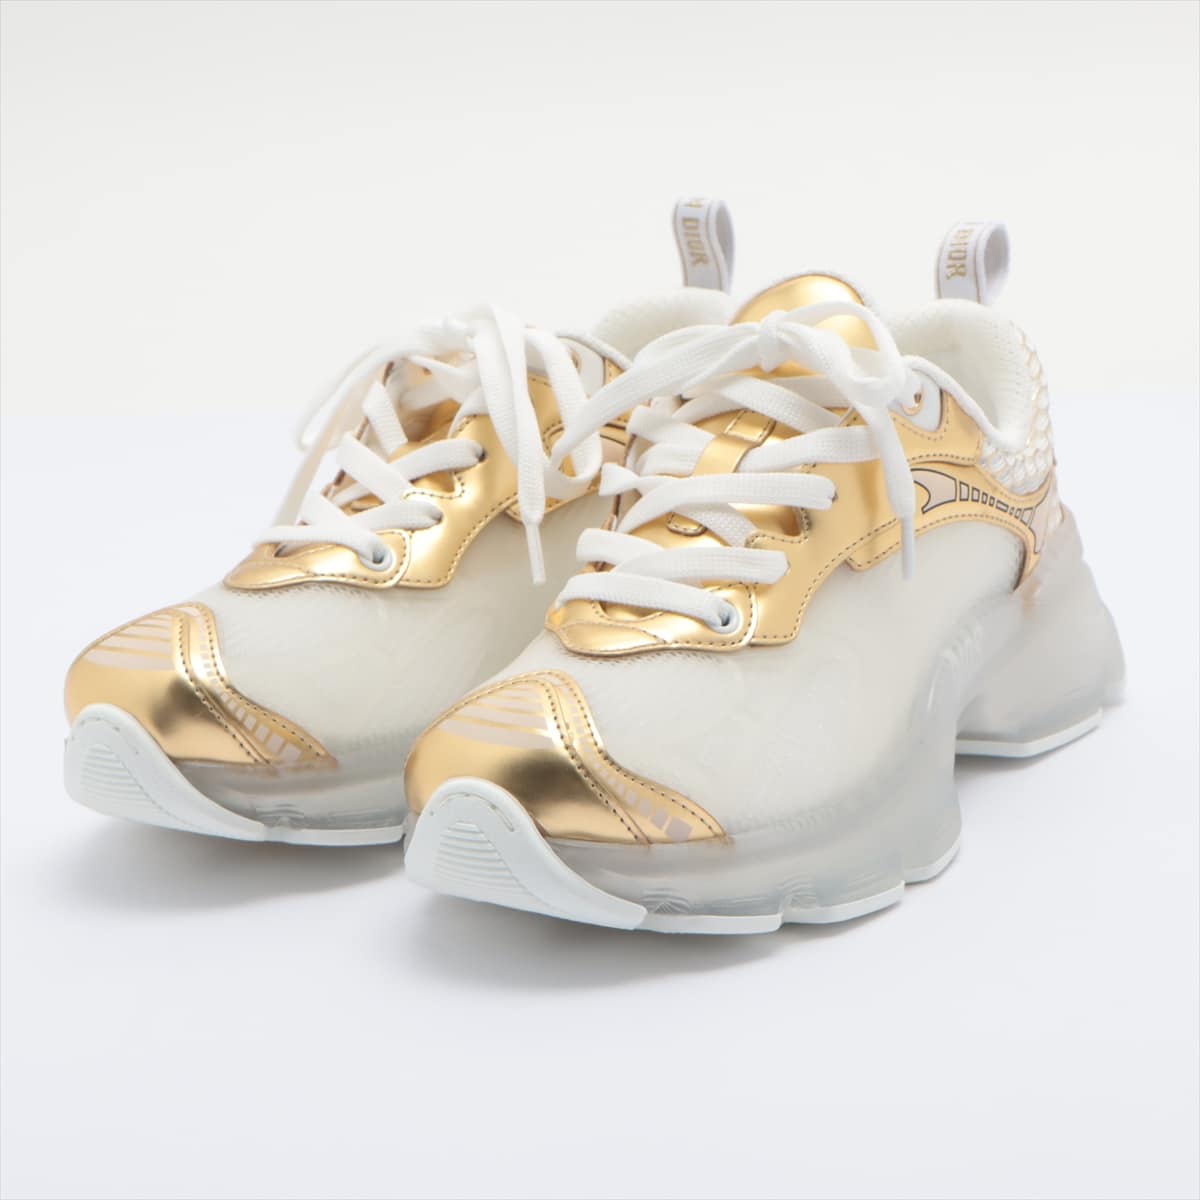 Christian Dior 22 years Mesh Sneakers 36 Ladies' White x gold Dior Vibe  Vaib Collection Technical x fabric